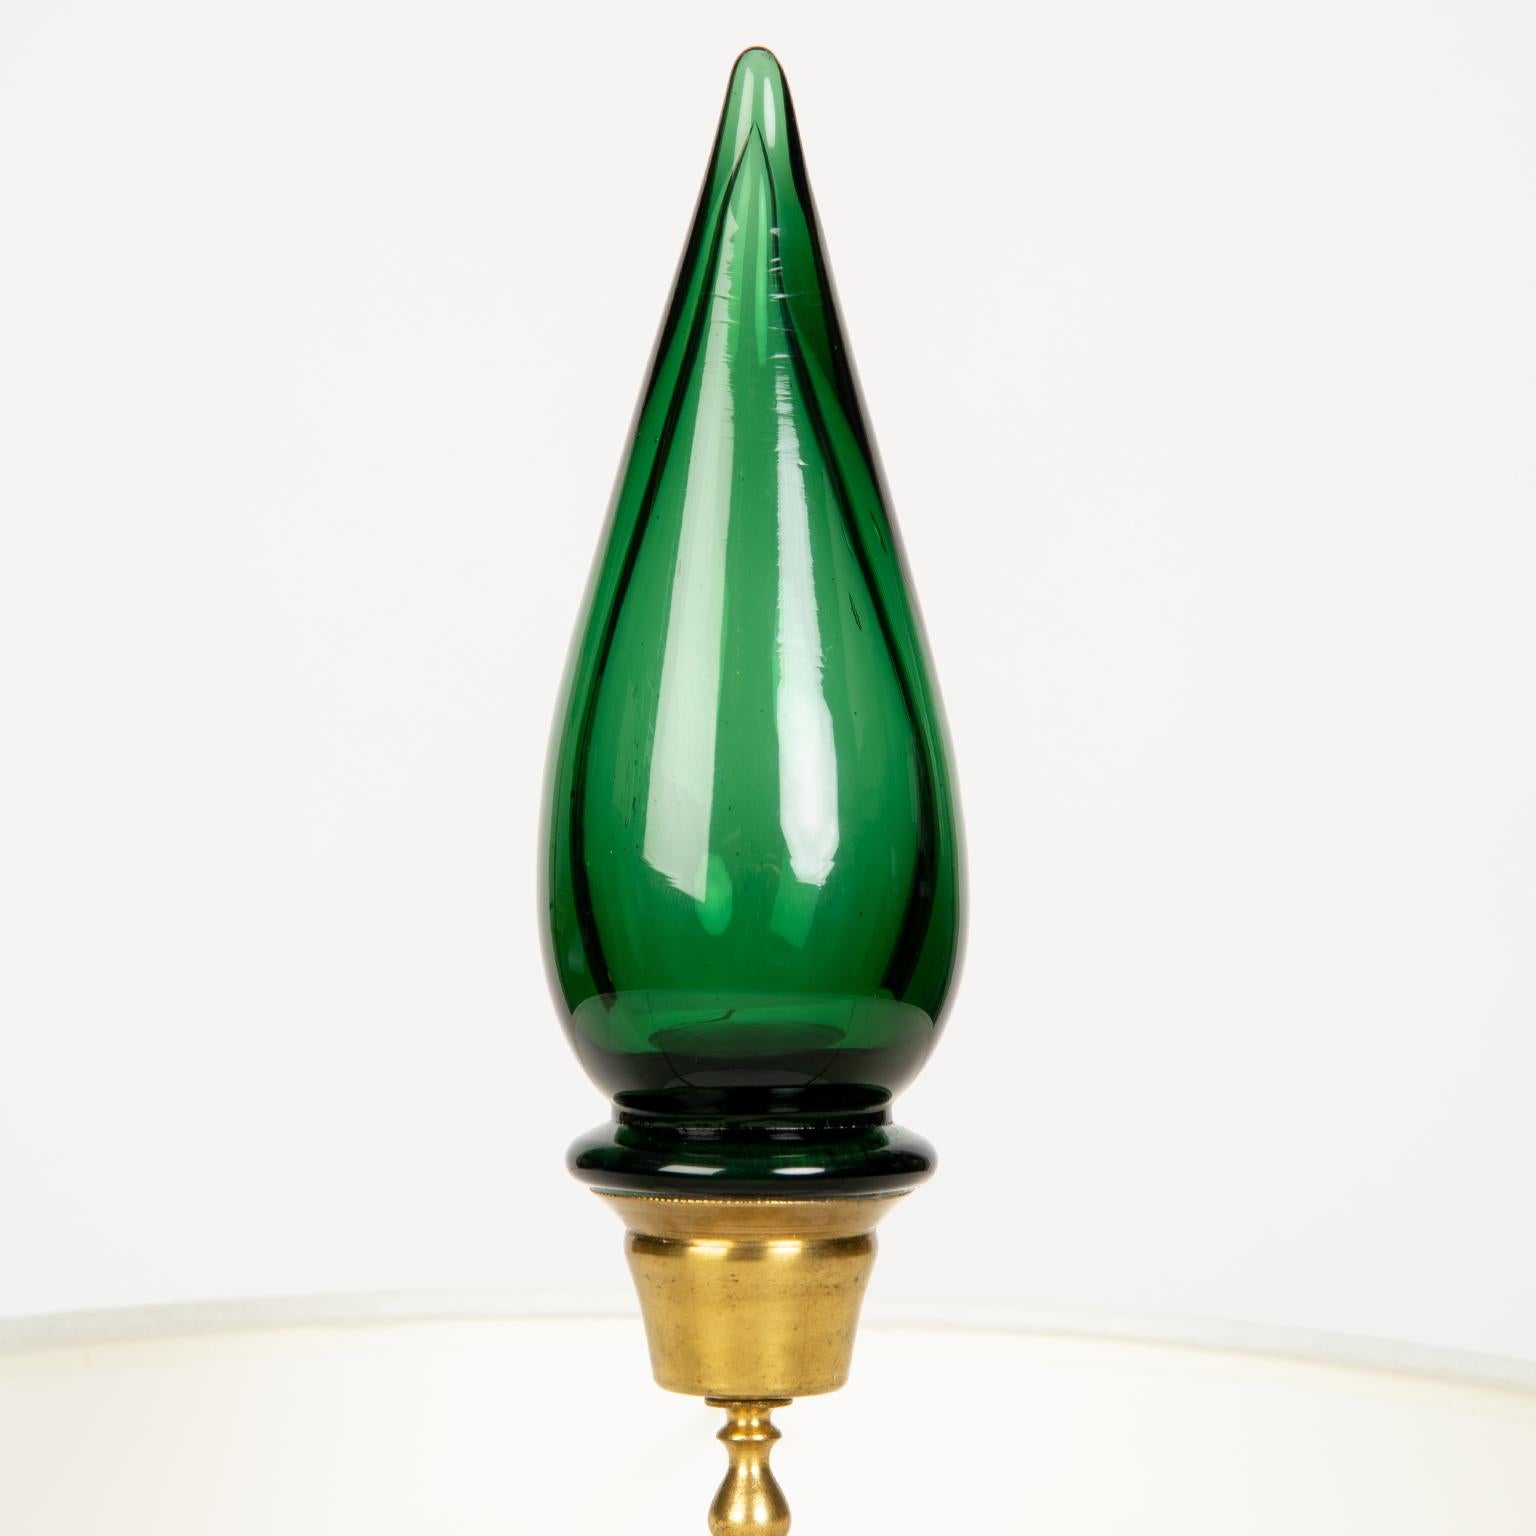 I love this decadent pale green glass lamp with original matching finial with new white shade and original gold
colored metal base.